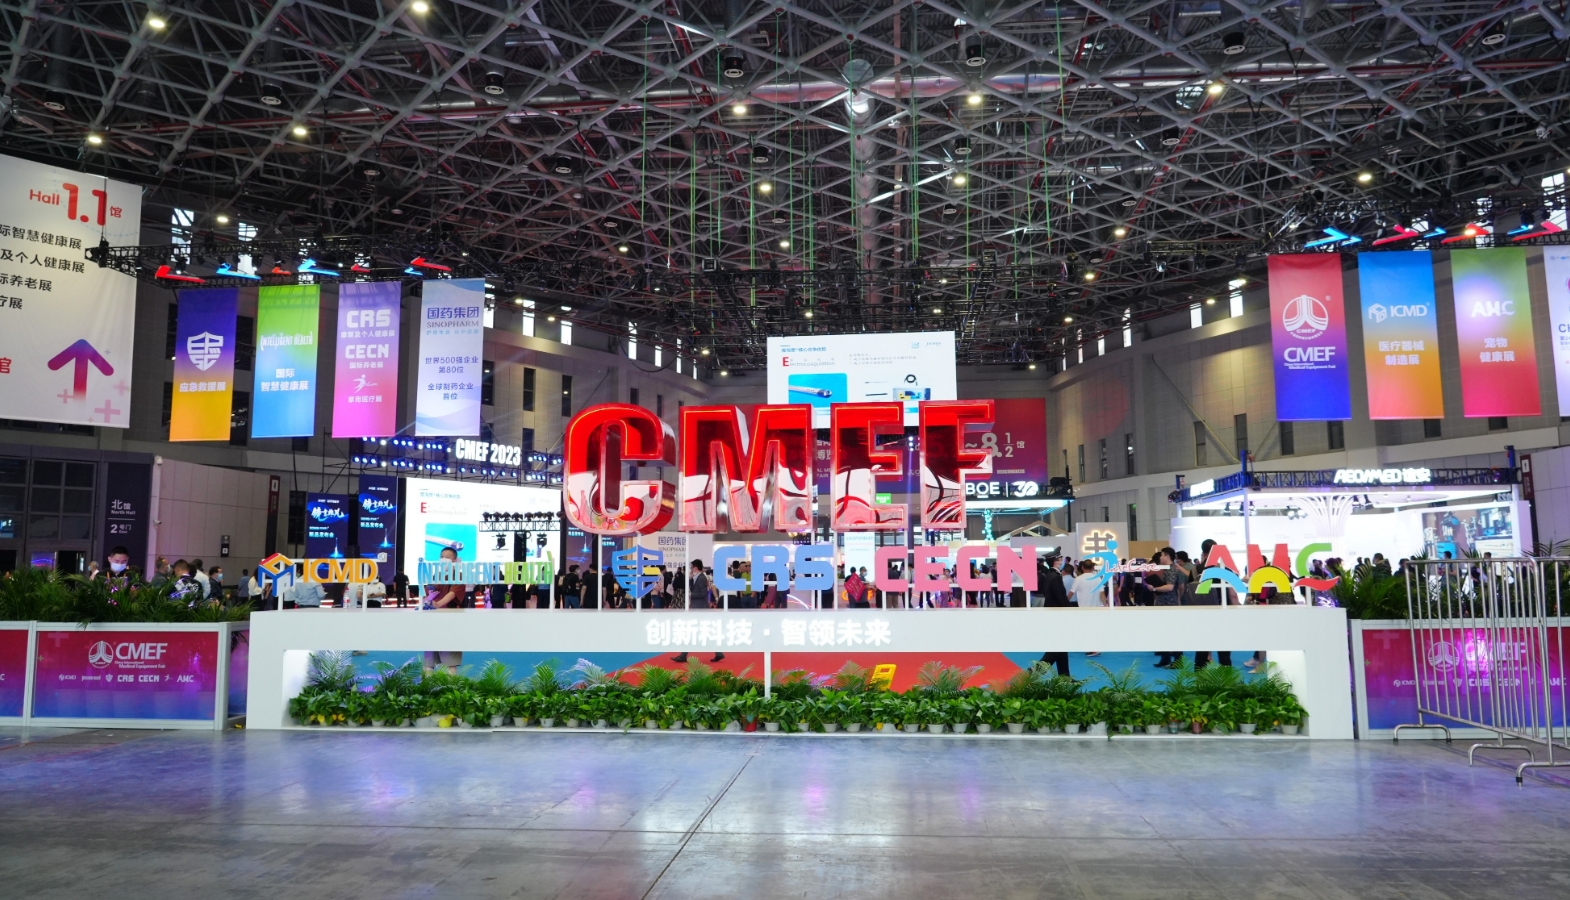 FPI Explores the Future of Cognitive Healthcare at the 87th China International Medical Equipment Fair (CMEF)